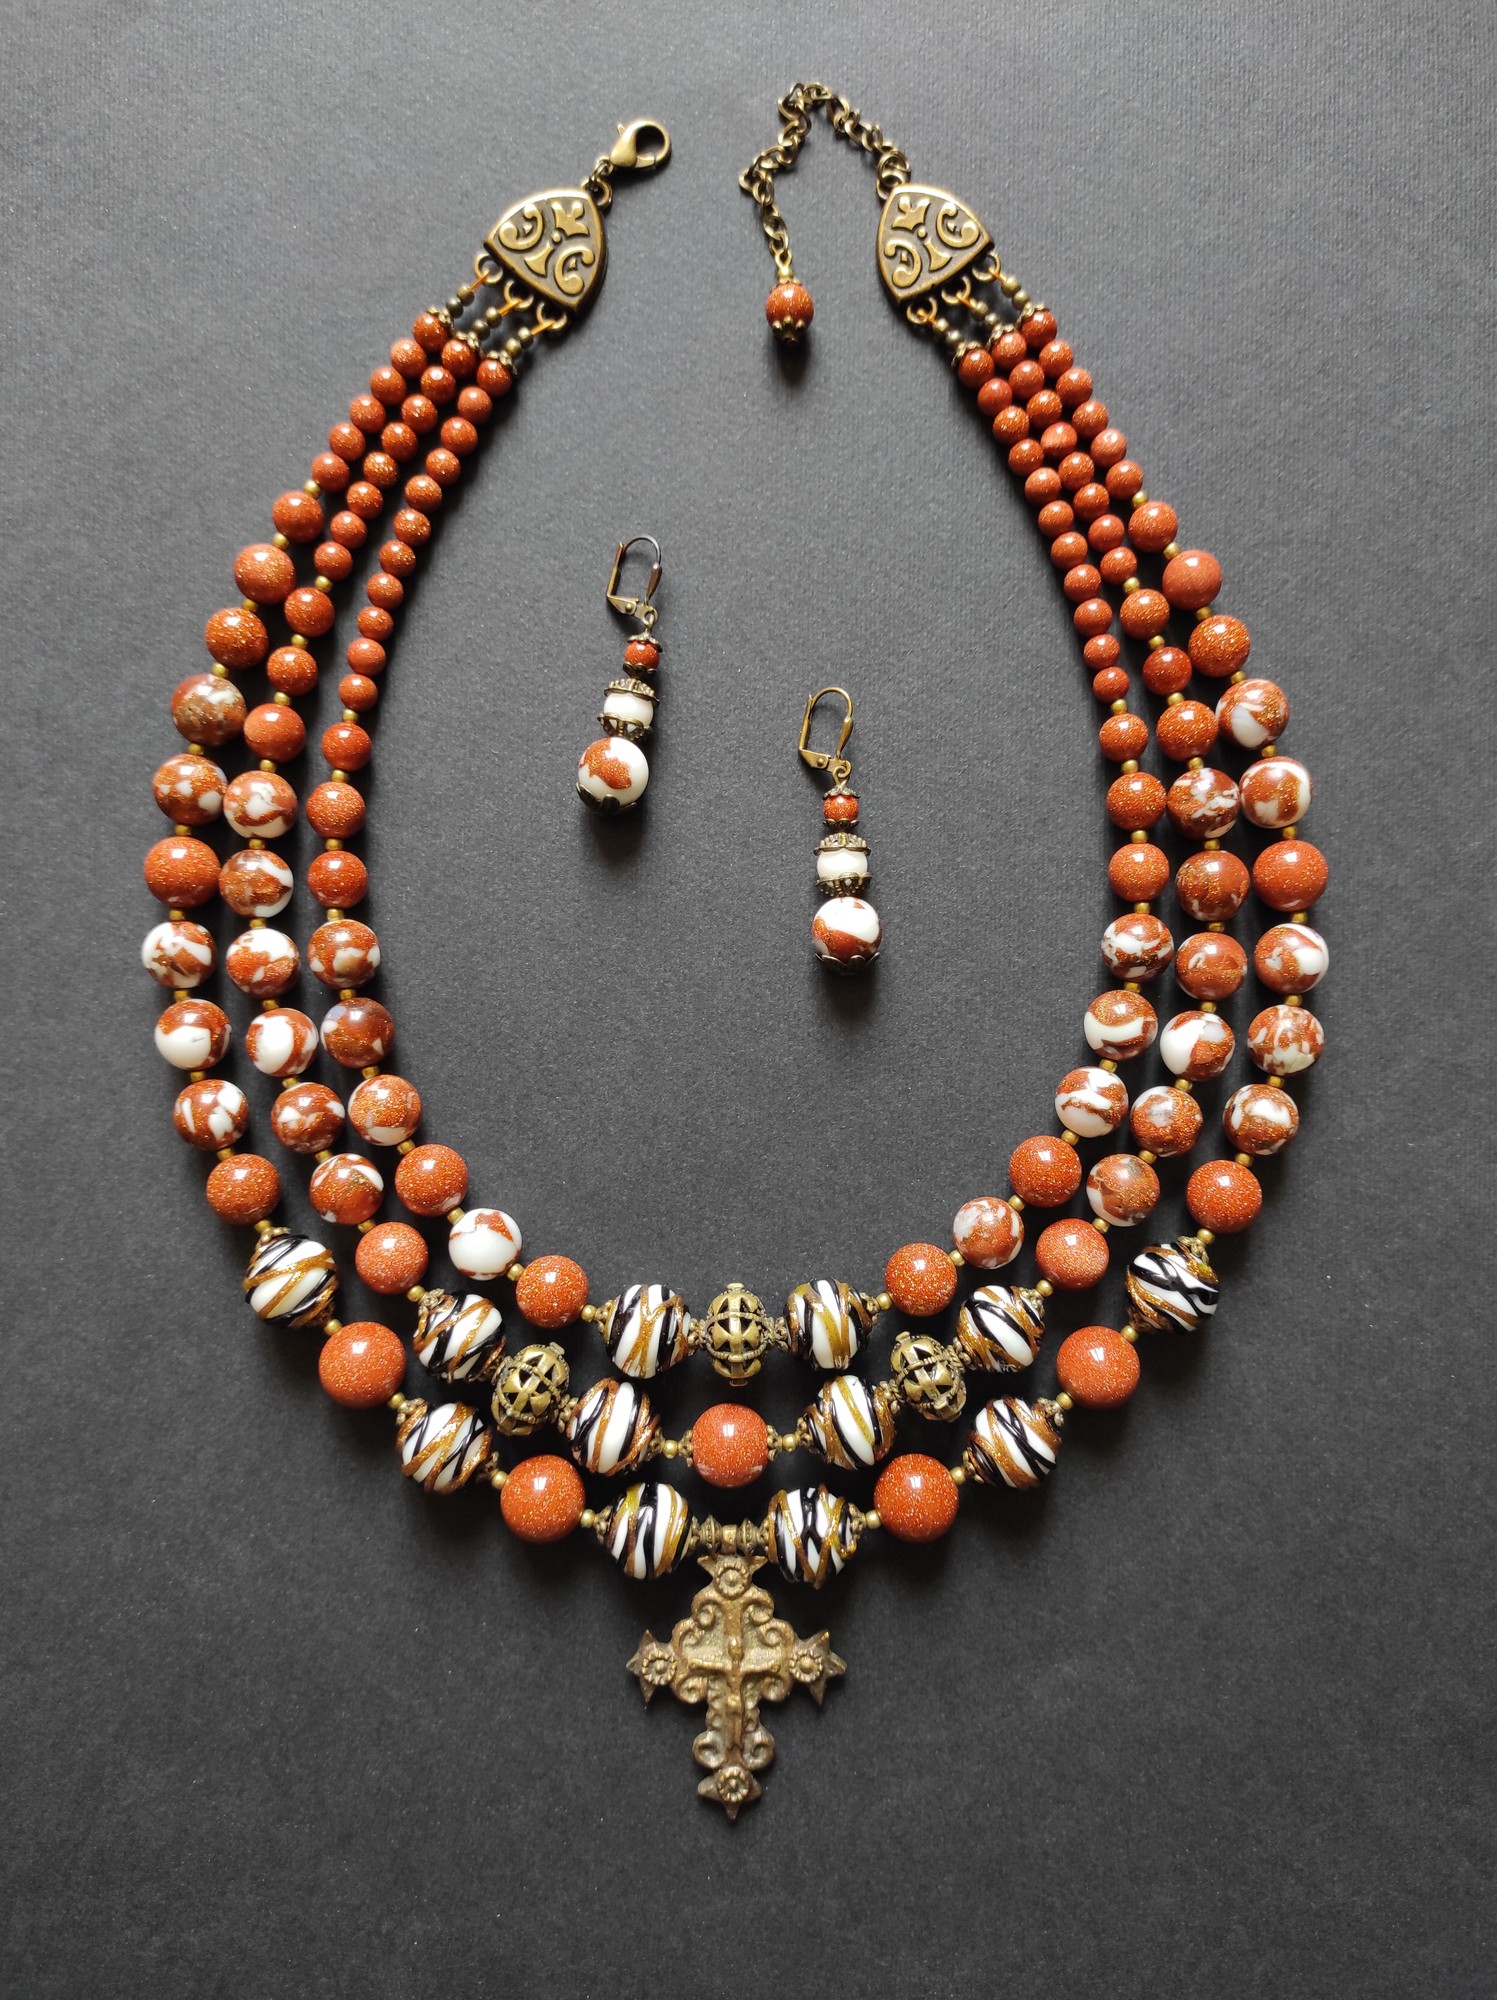 Necklace zgarda "Chocolate" from glass beads and adventurin "Golden sand"